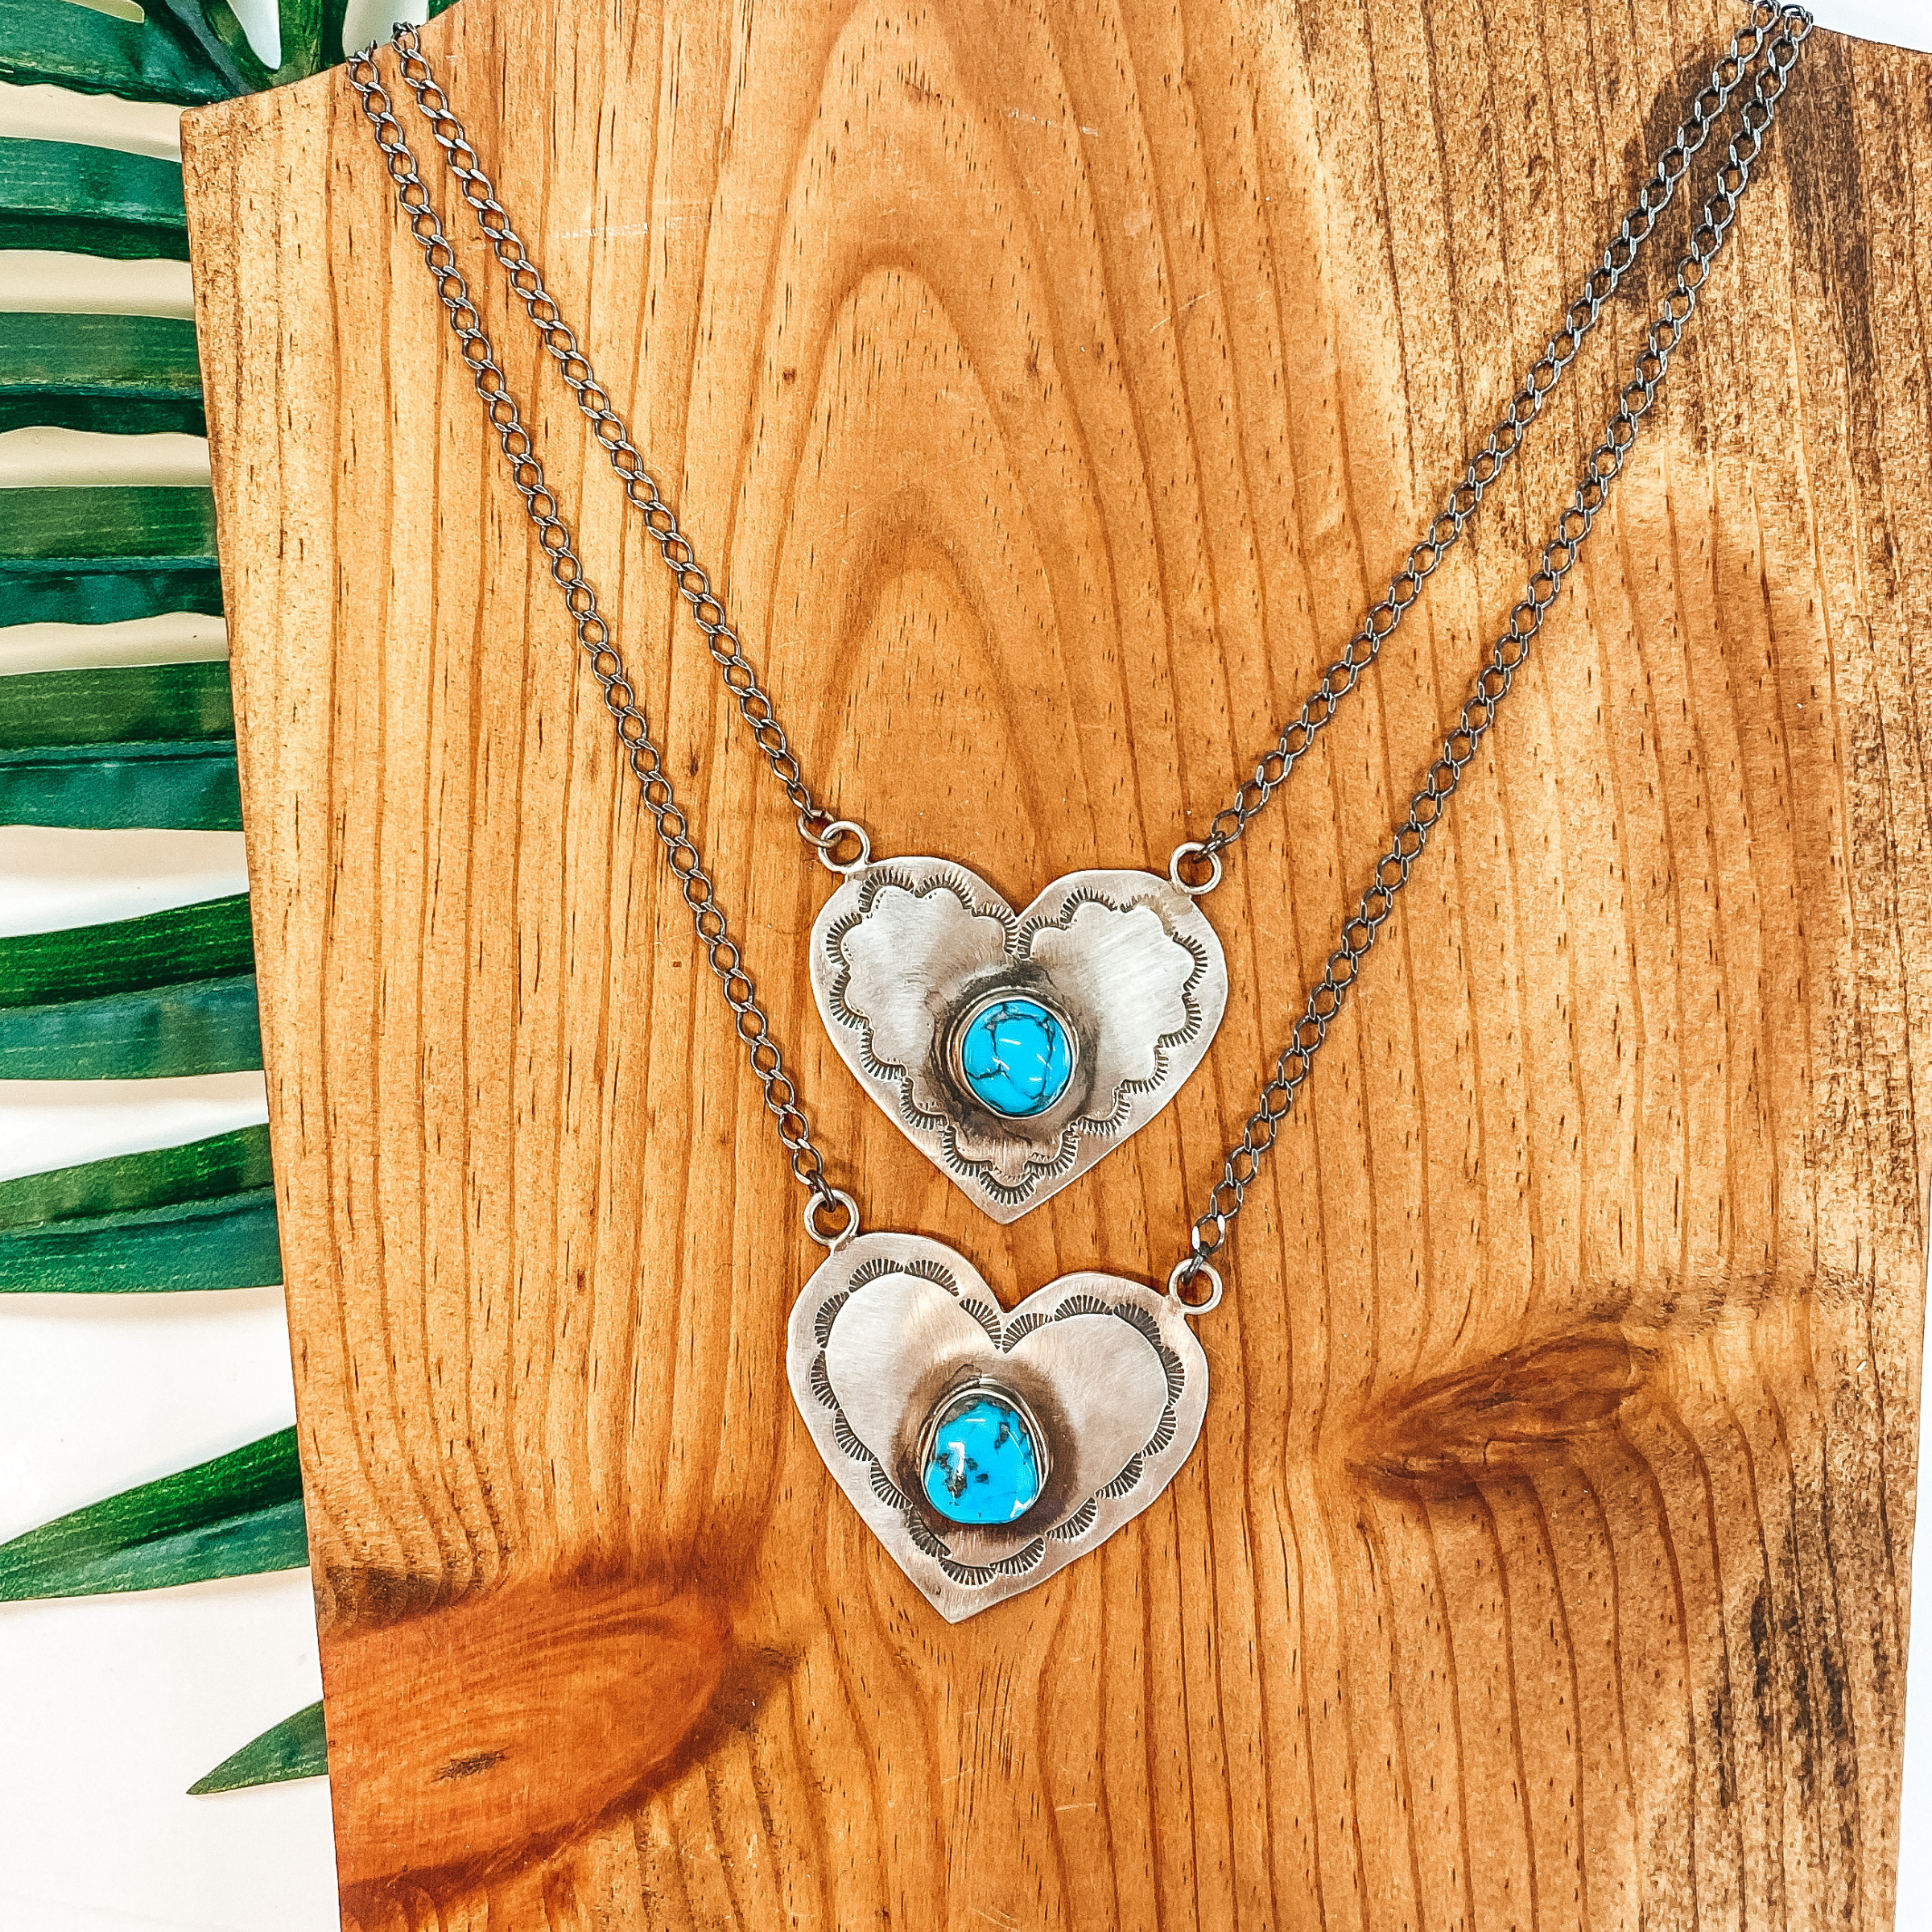 Rick Enriquez | Navajo Handmade Sterling Silver Necklace with Heart Pendant and Turquoise Stone - Giddy Up Glamour Boutique